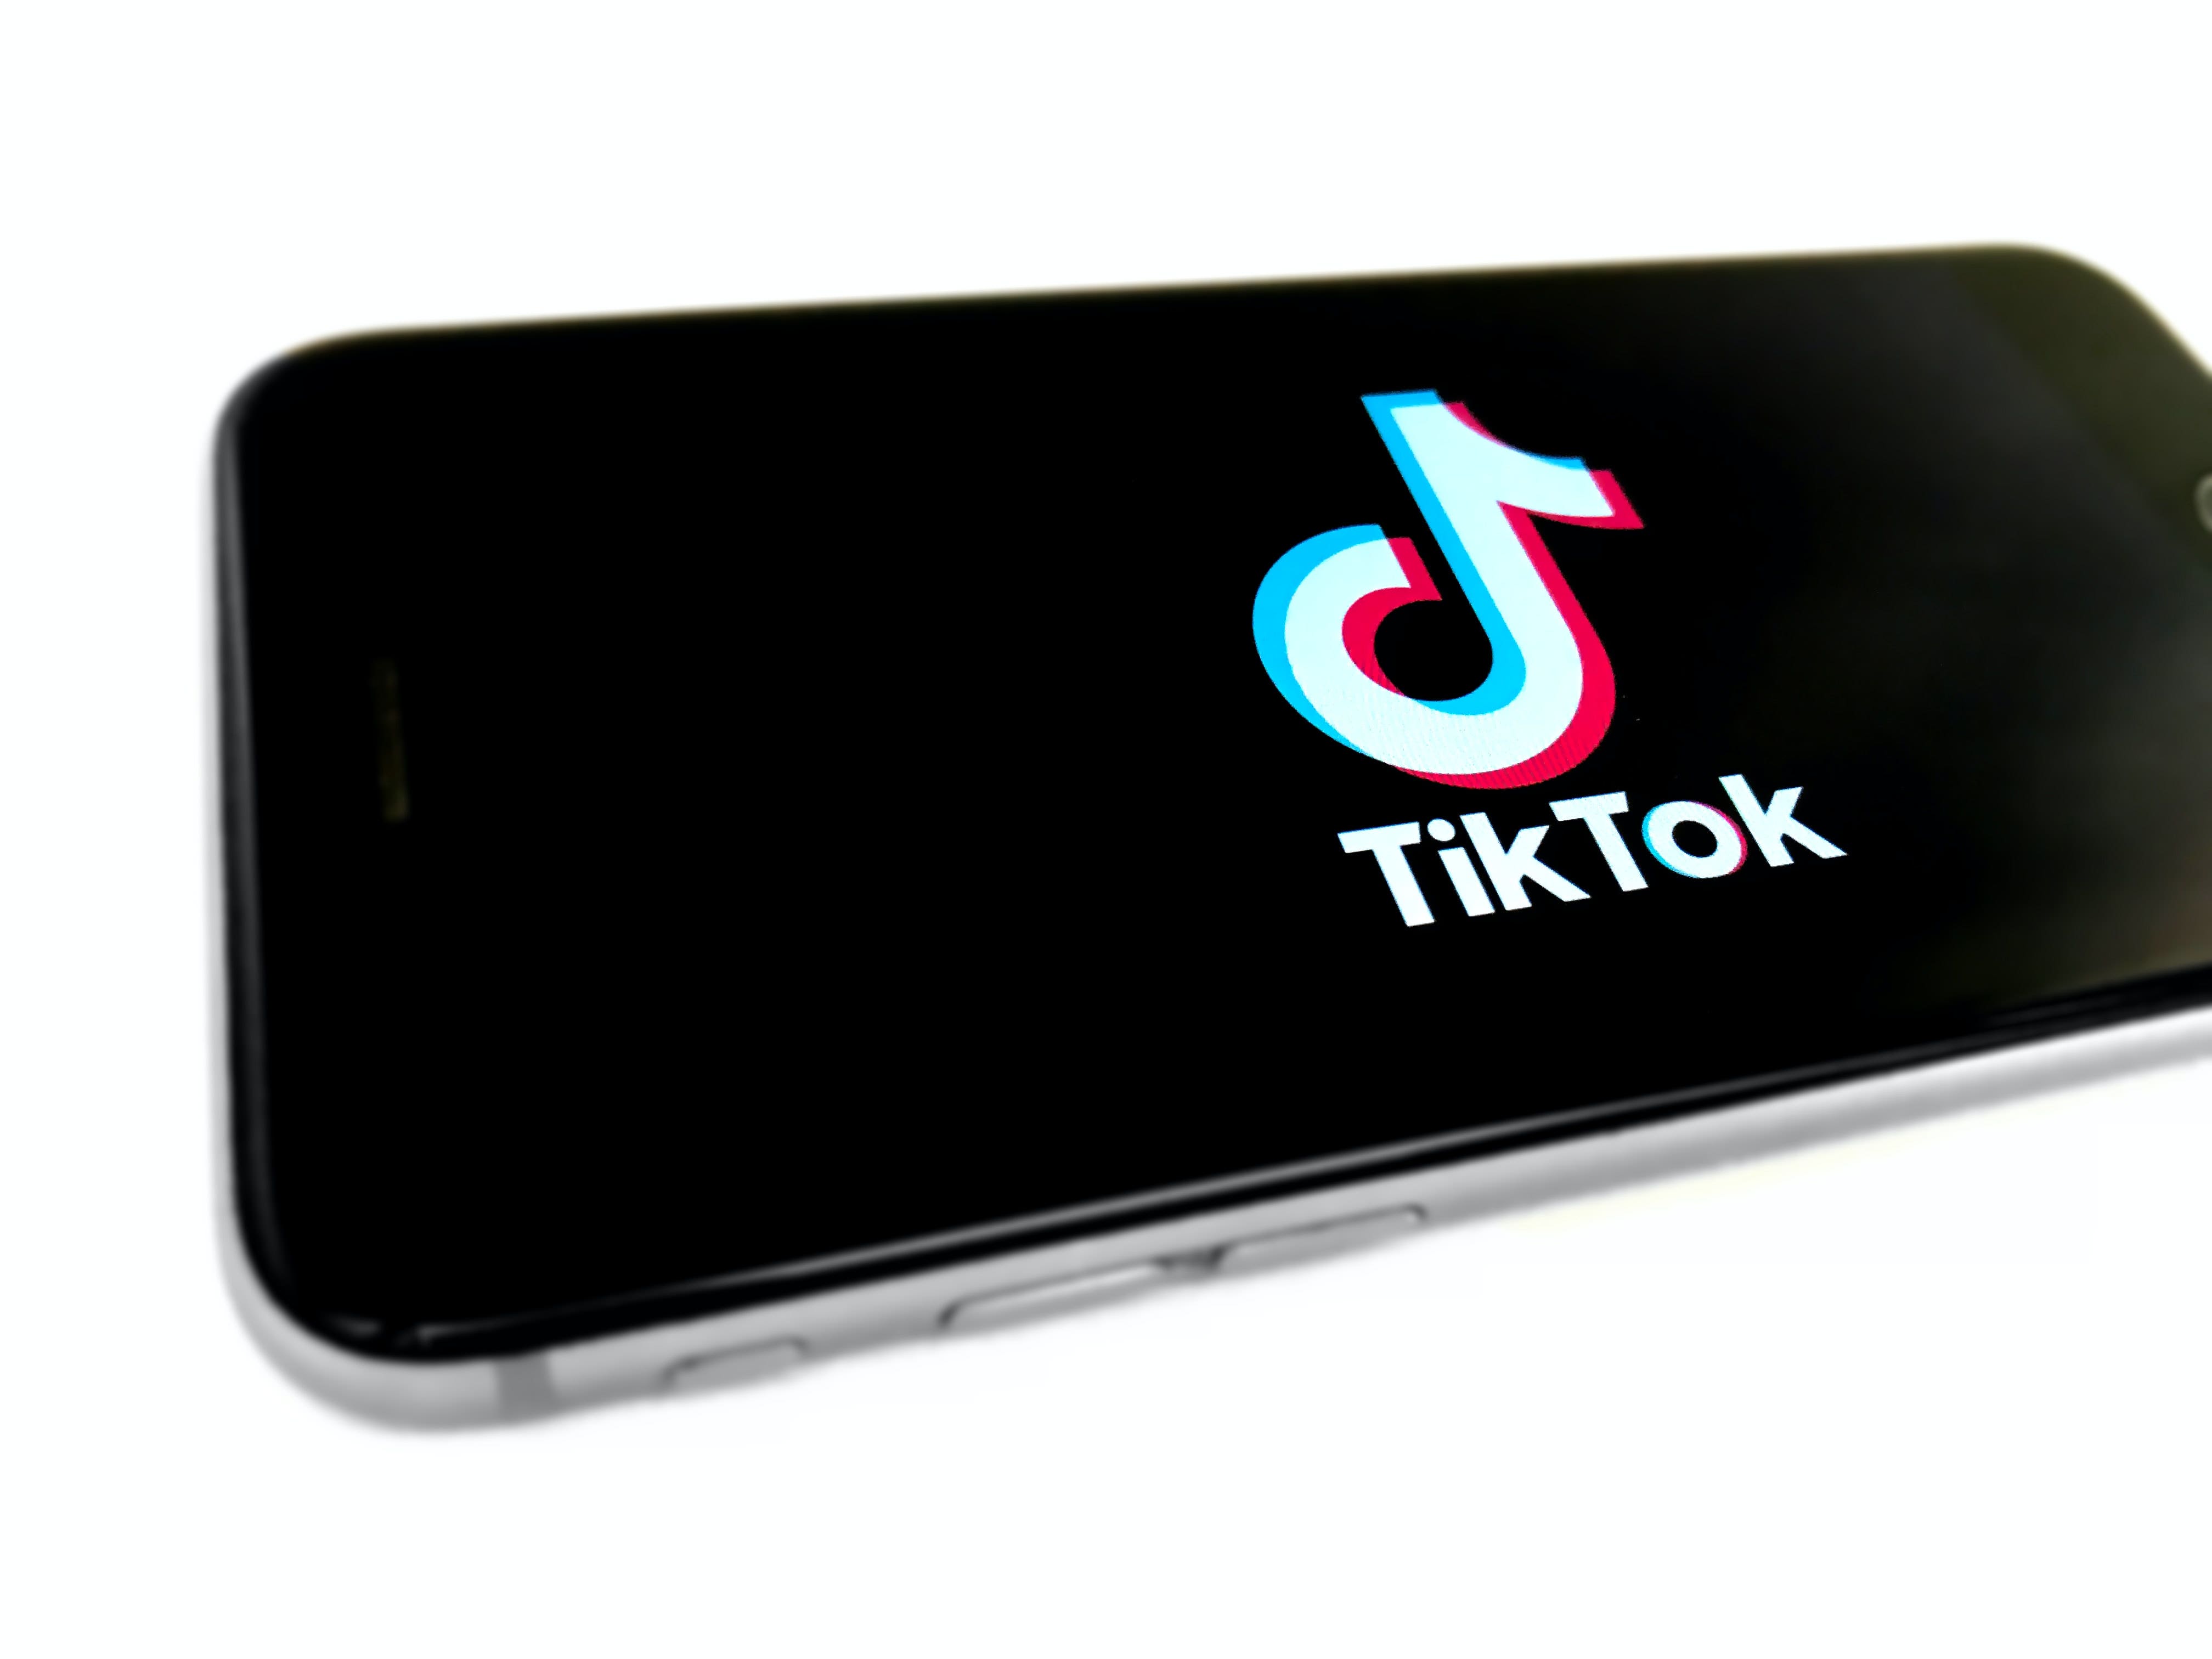 Report: ByteDance's TikTok Severs Ties With Alibaba Cloud Services Outside of China: What Companies Will Be Potential Beneficiaries?